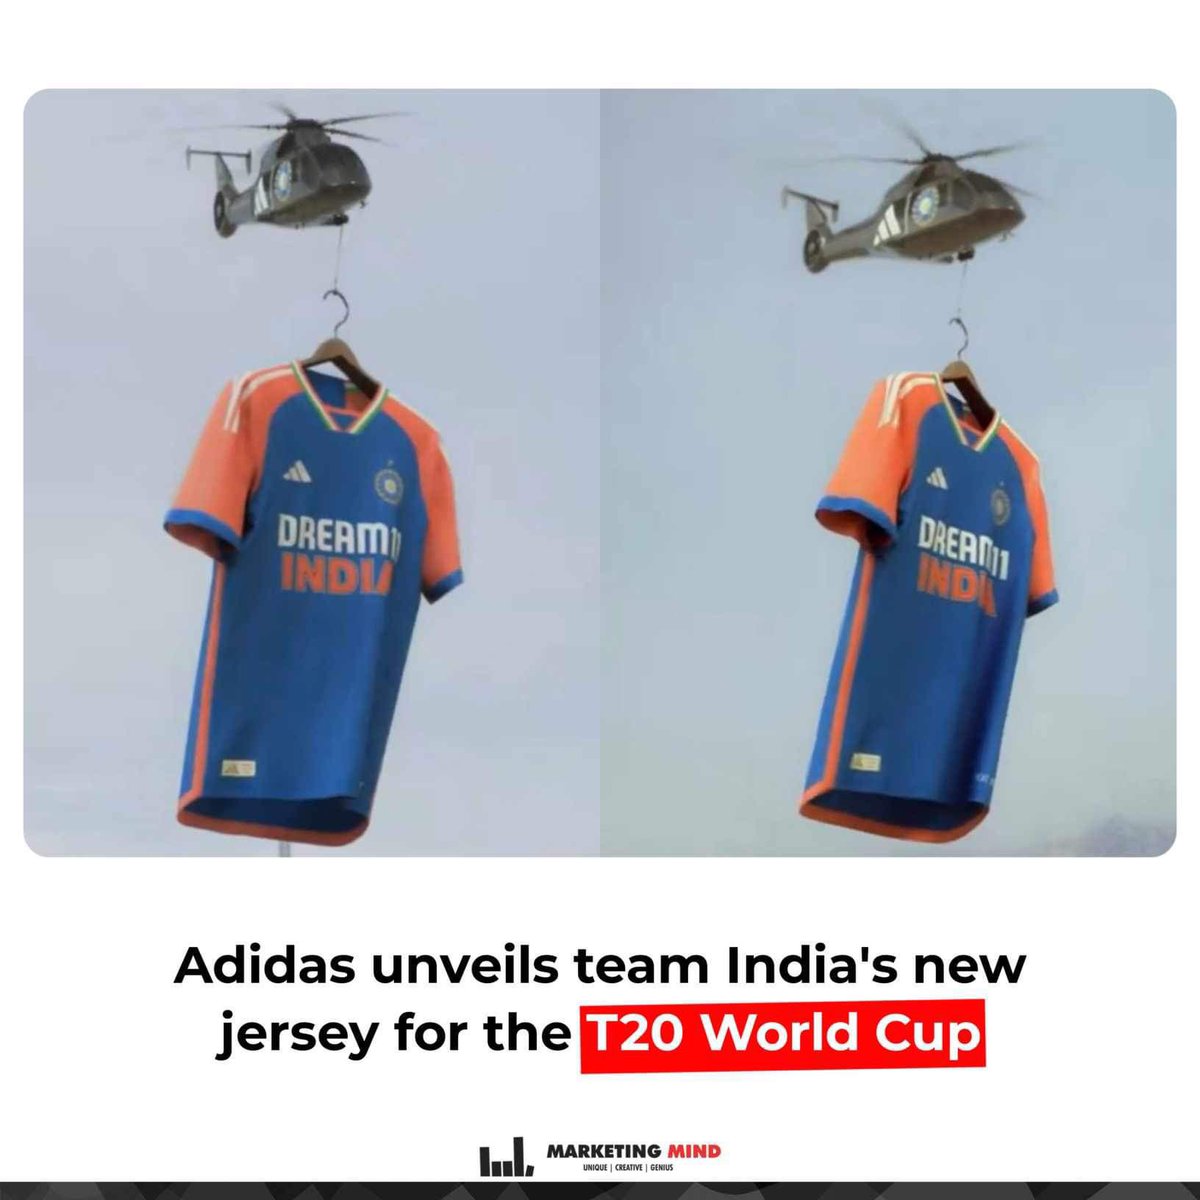 Adidas has posted the video revealing the look of the new jersey across on social media platforms with the tagline “One jersey. One Nation”.

#MarketingMind #Adidas #WhatsBuzzing #T20WC